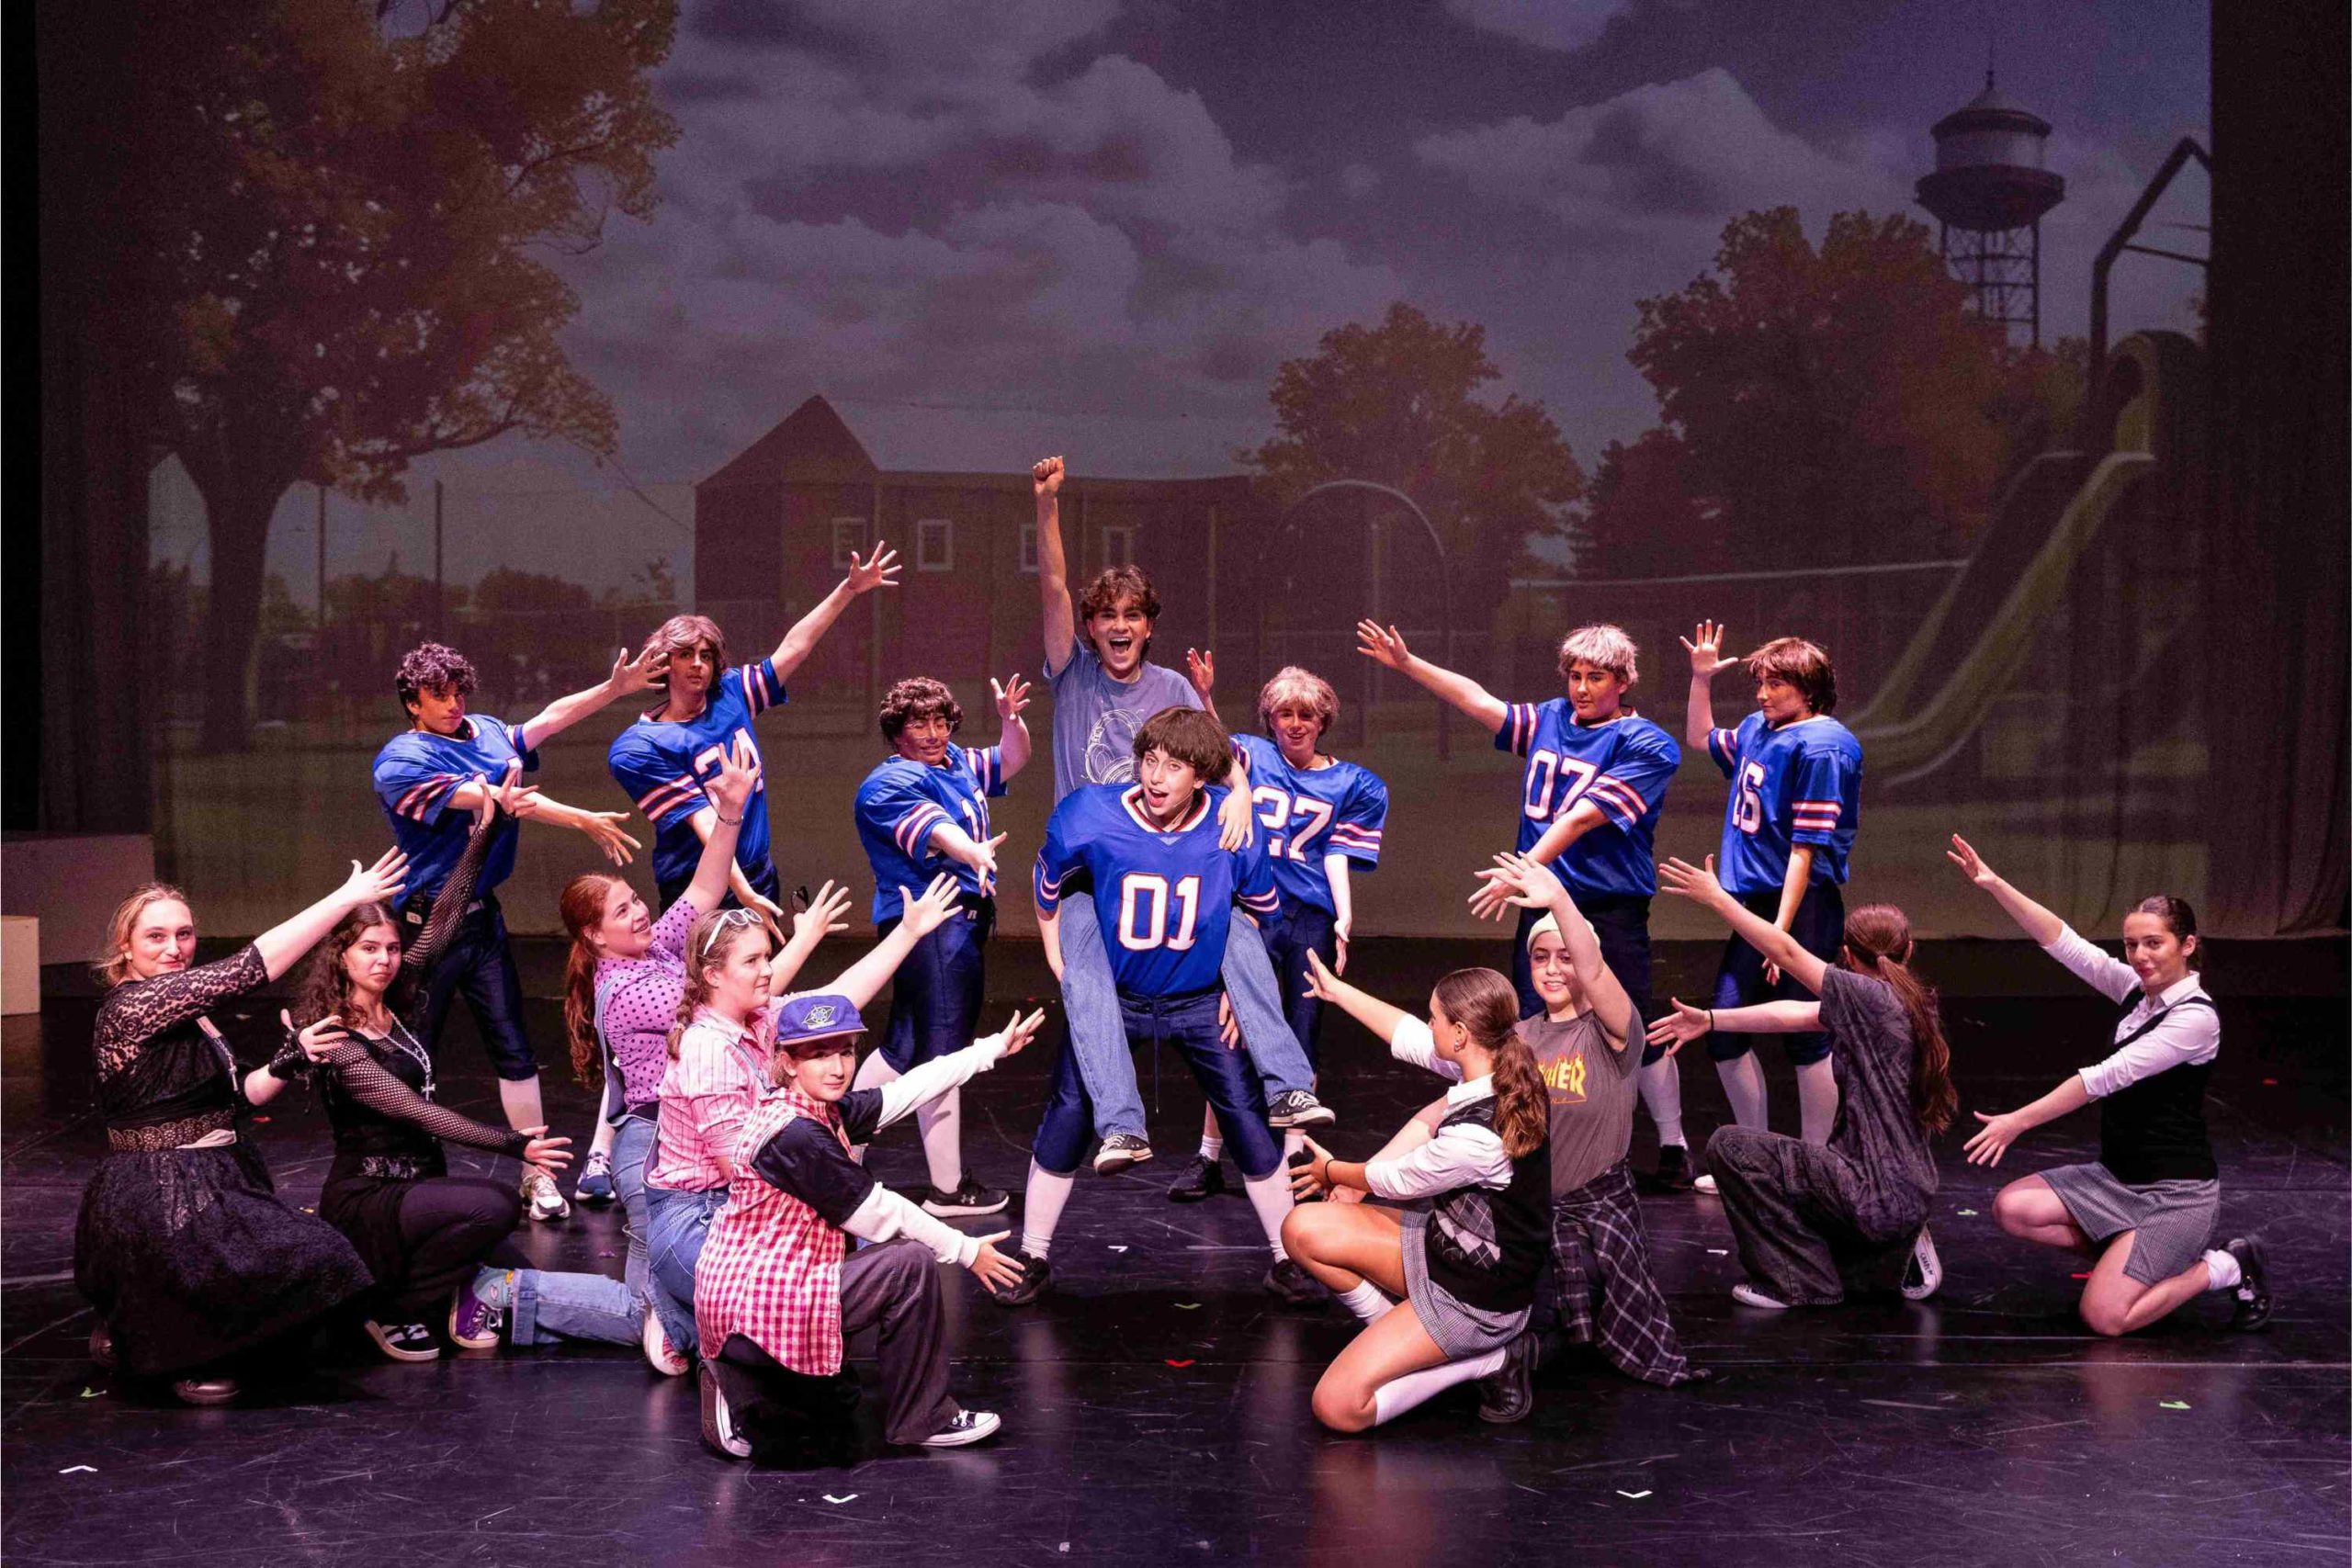 Characters in 13 the musical are in formation around the two lead characters - a jock and a regular boy.